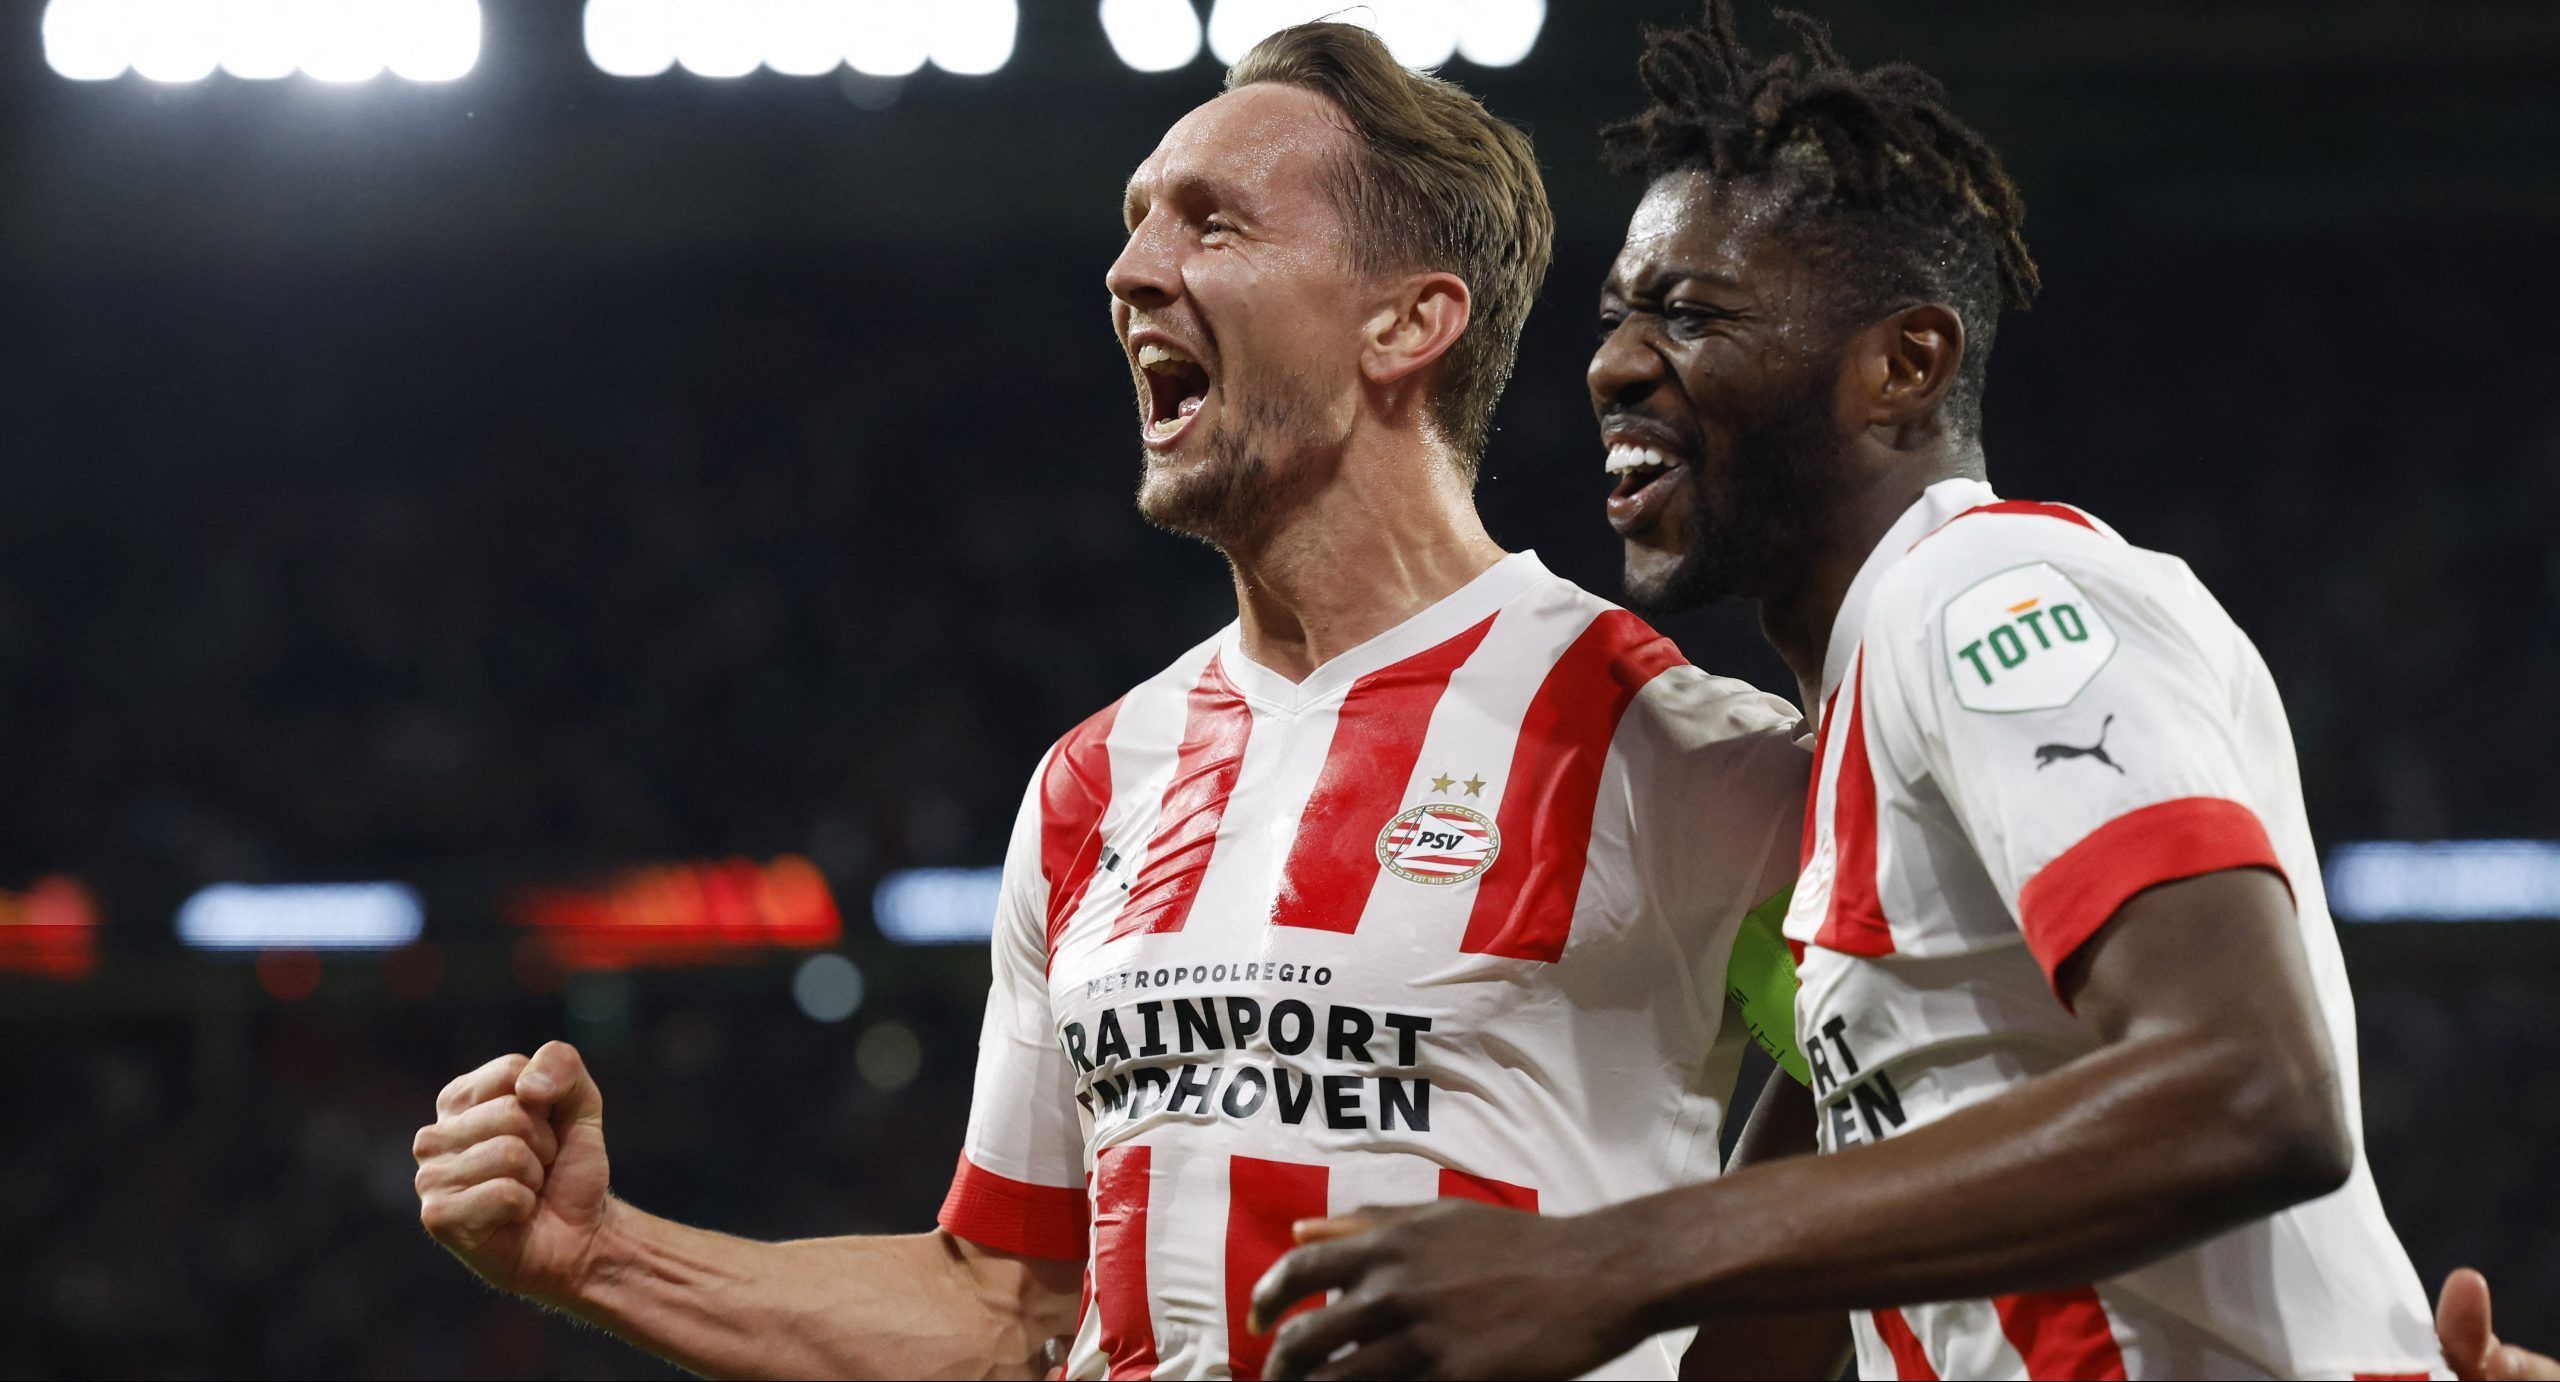 Soccer Football - Europa League - Group A - PSV Eindhoven v Arsenal - Philips Stadion, Eindhoven, Netherlands - October 27, 2022  PSV Eindhoven's Luuk de Jong celebrates scoring their second goal with Ibrahim Sangare REUTERS/Piroschka Van De Wouw